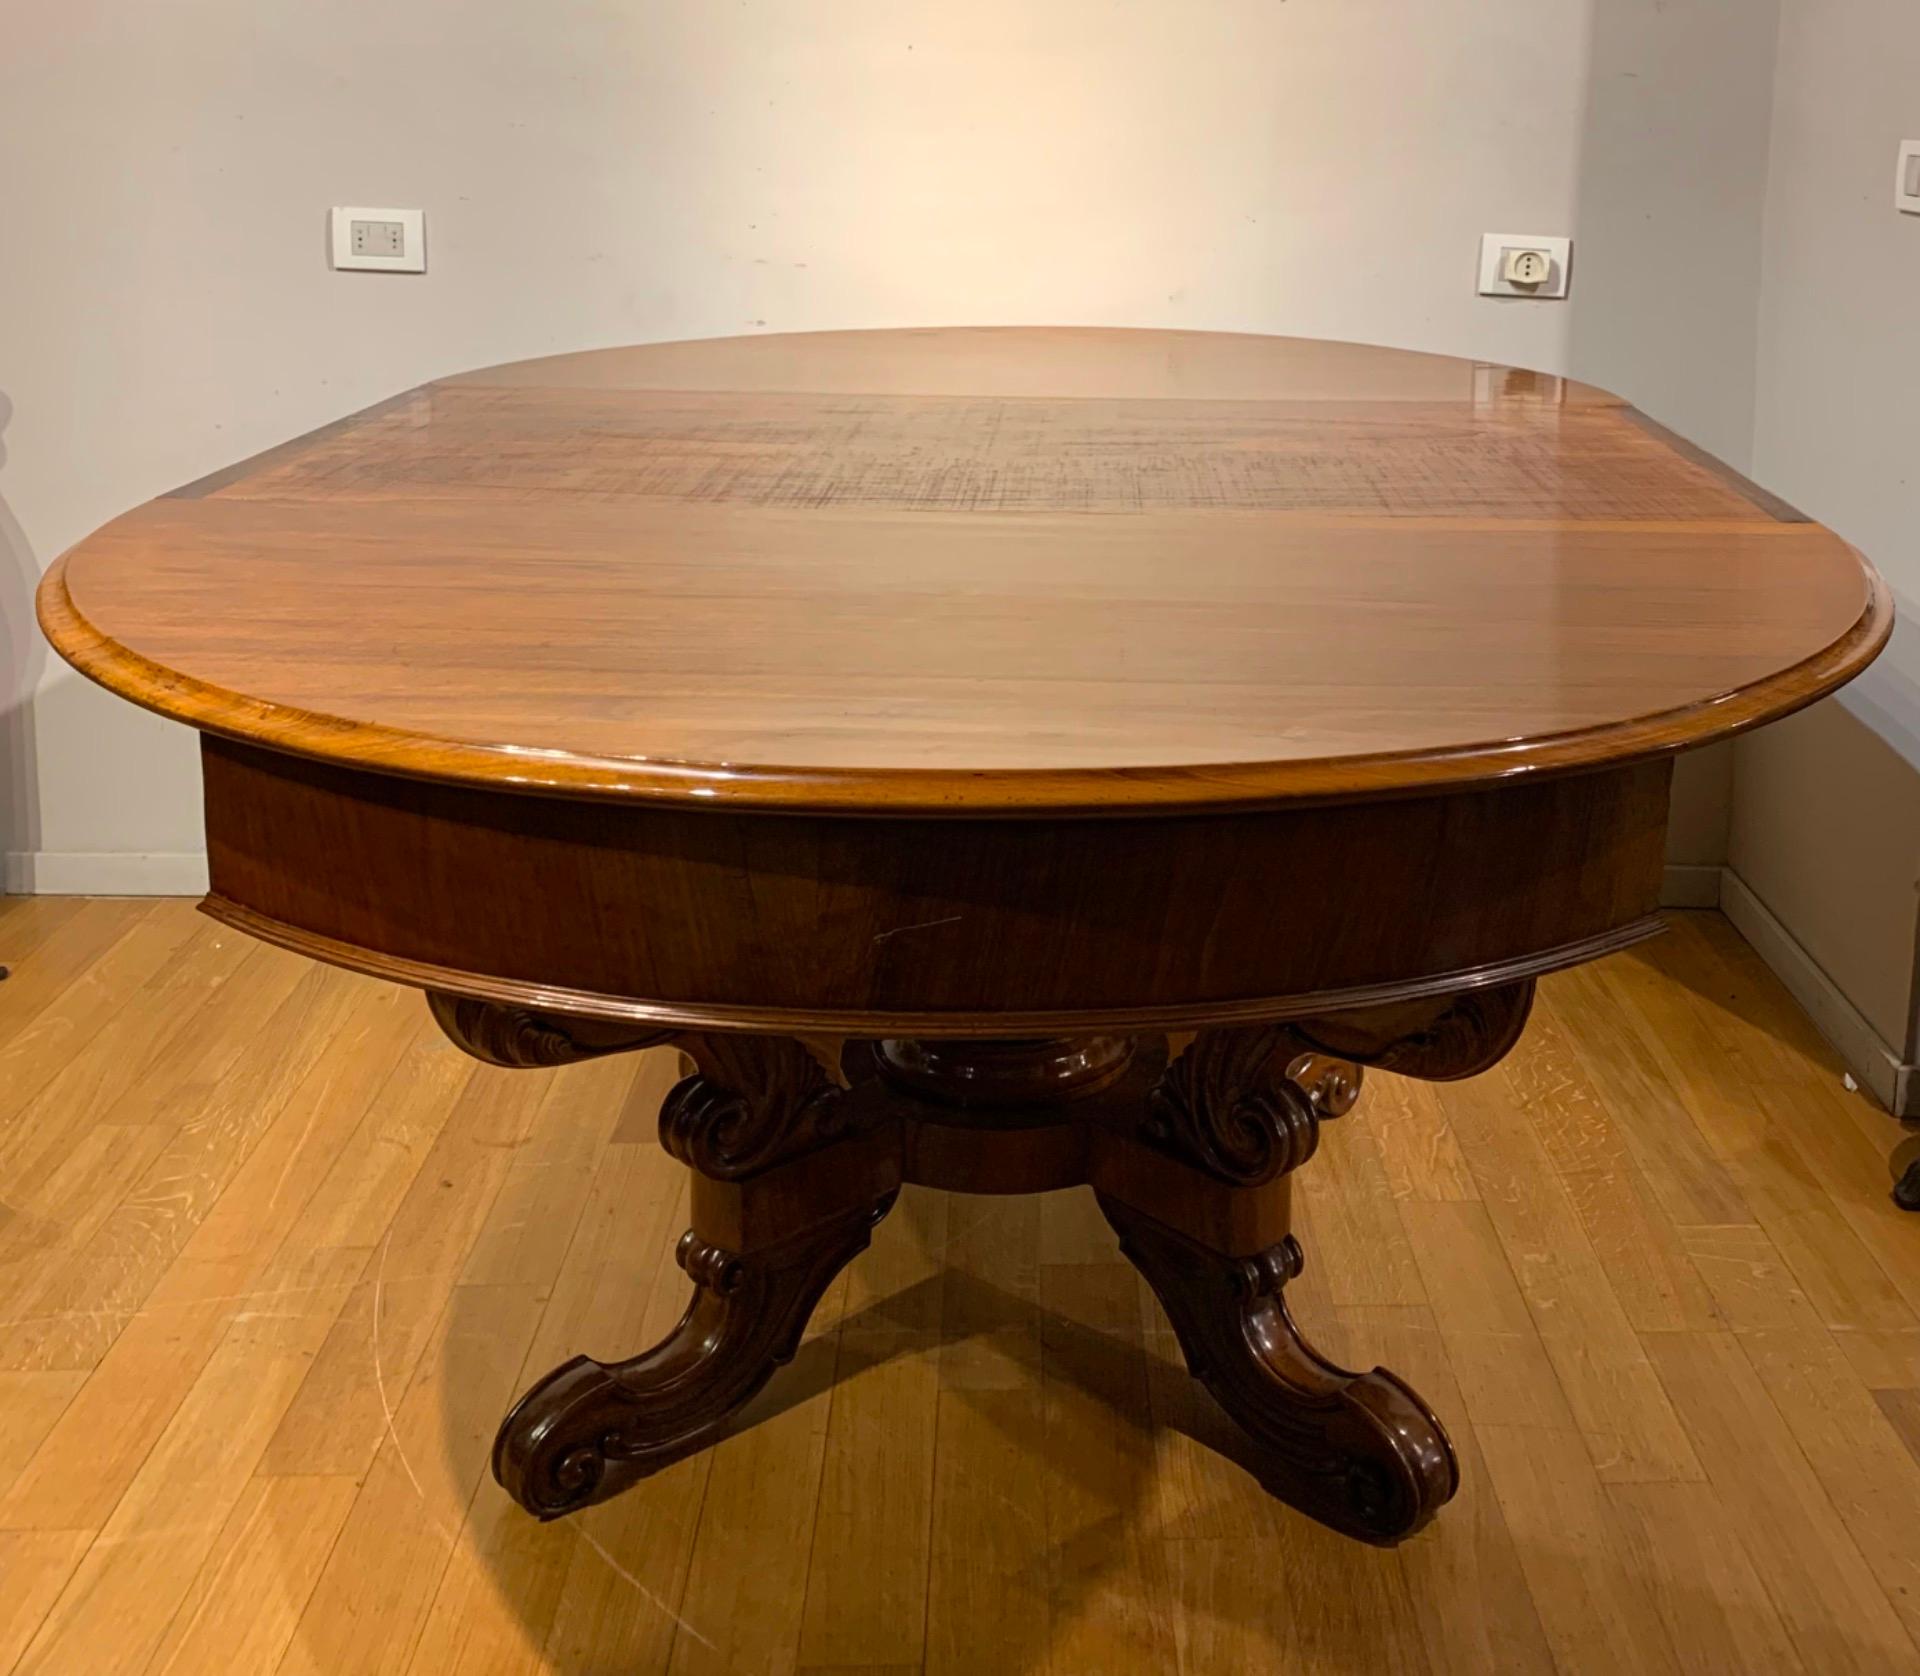 Elegant table in solid walnut with round opening top supported by four cross legs carved in the shape of a stylized cornucopia.
The top opens up to an extension of 3 m supported by 4 turned legs hidden under the top.
The table comes with a shiny